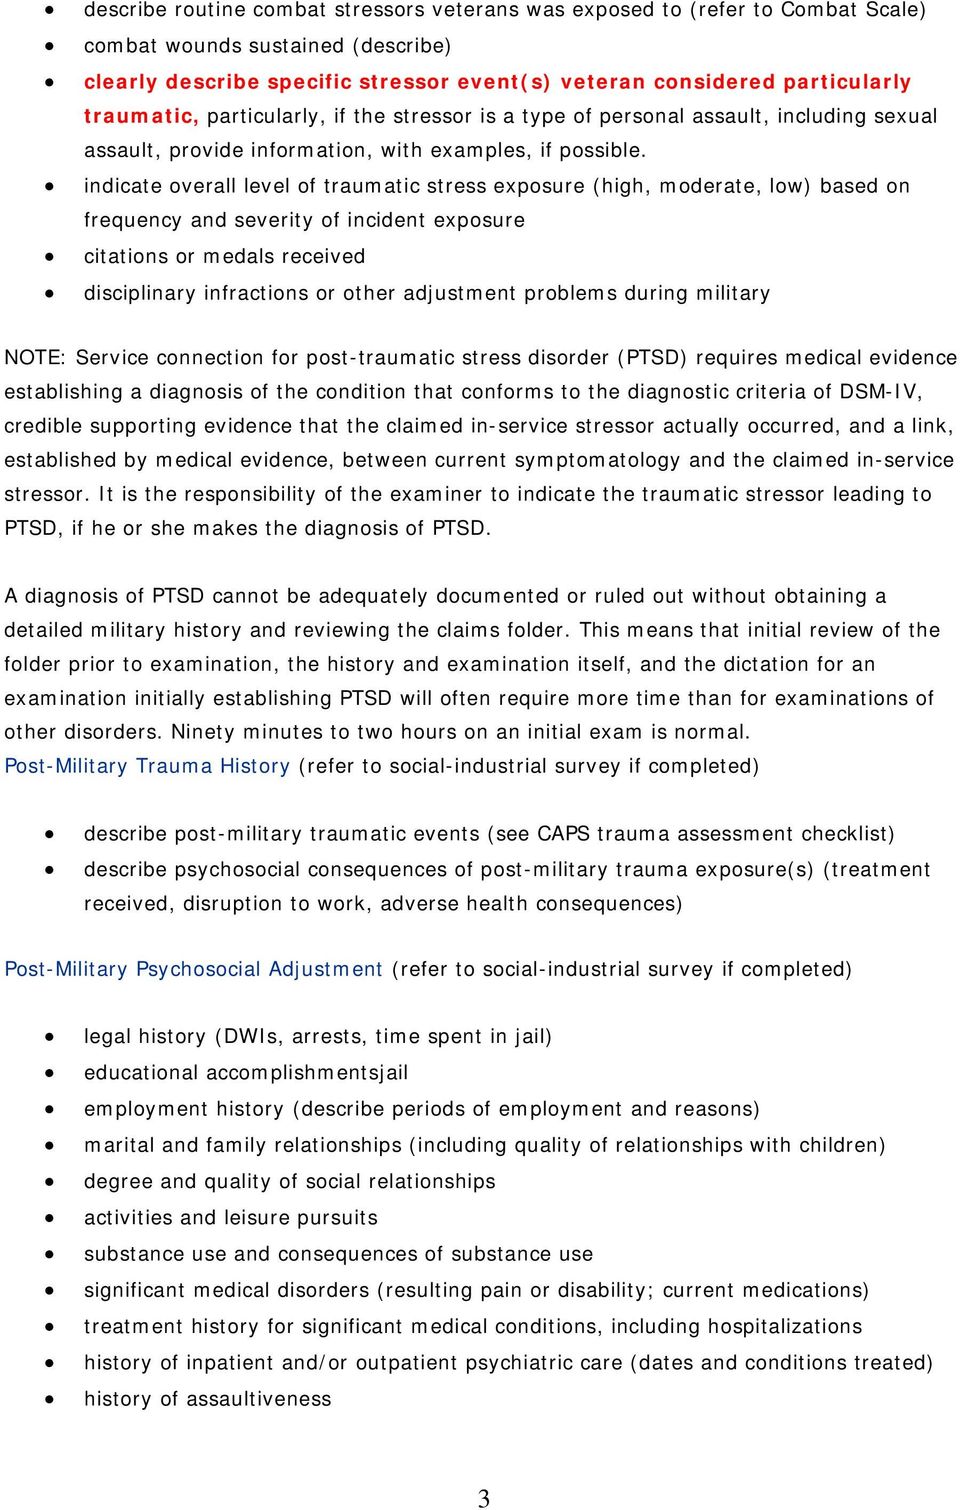 indicate overall level of traumatic stress exposure (high, moderate, low) based on frequency and severity of incident exposure citations or medals received disciplinary infractions or other